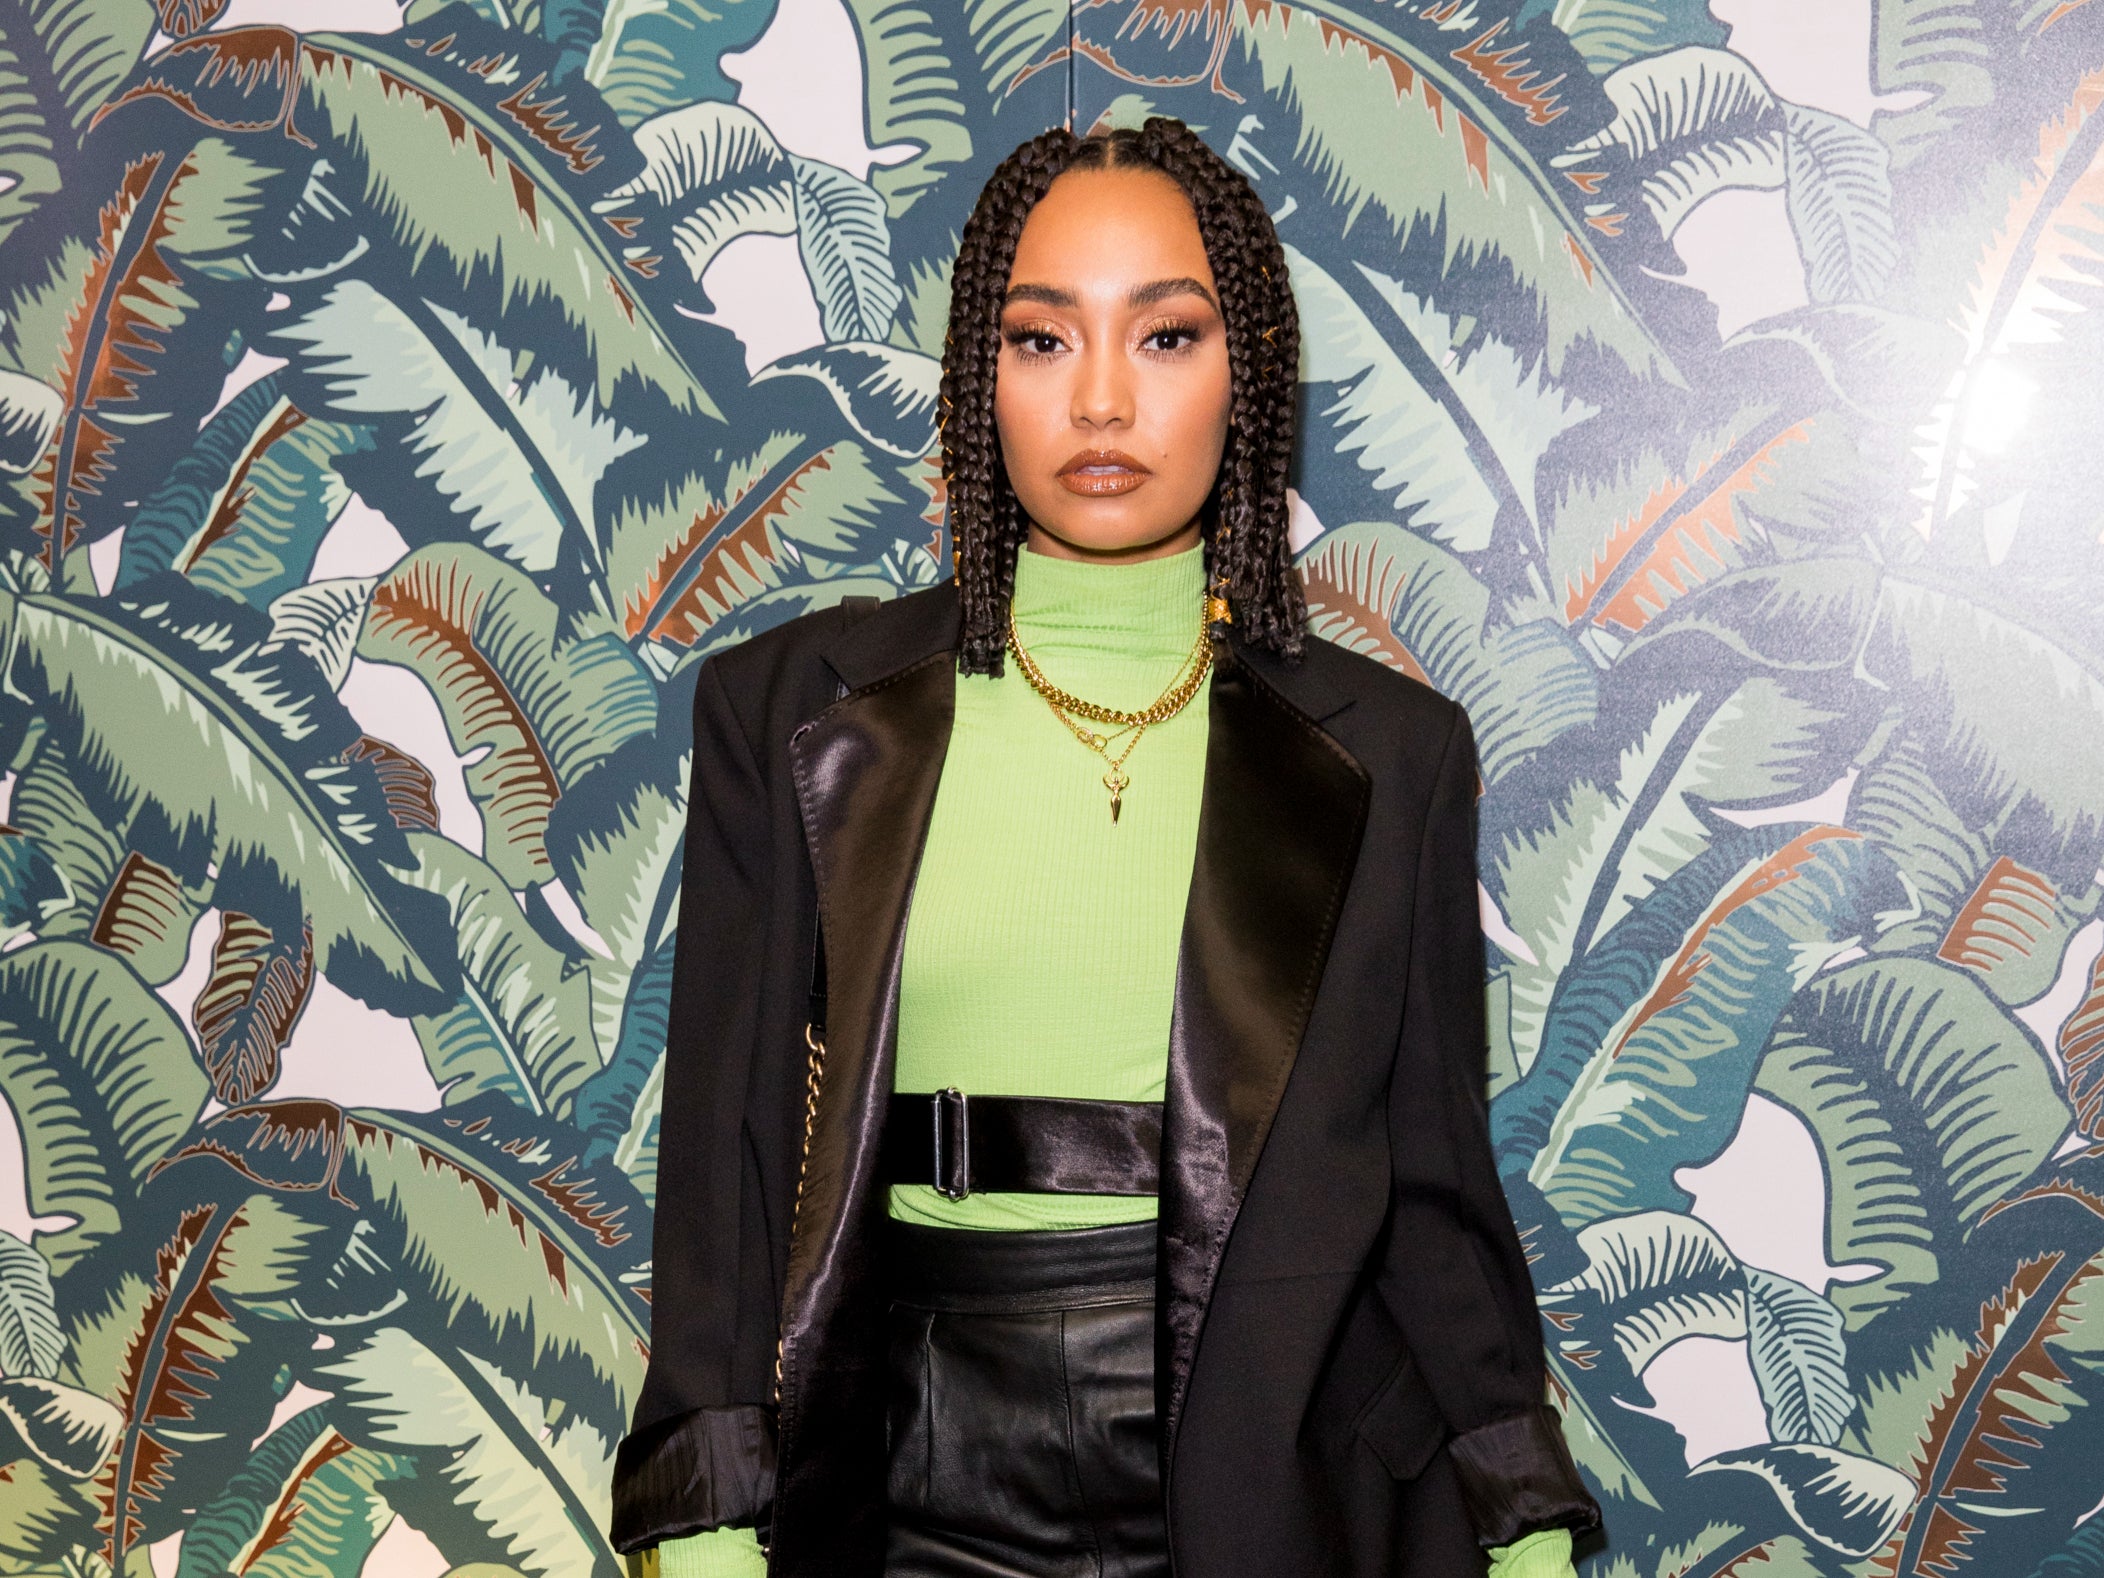 Leigh Anne-Pinnock attends an event in Soho, London